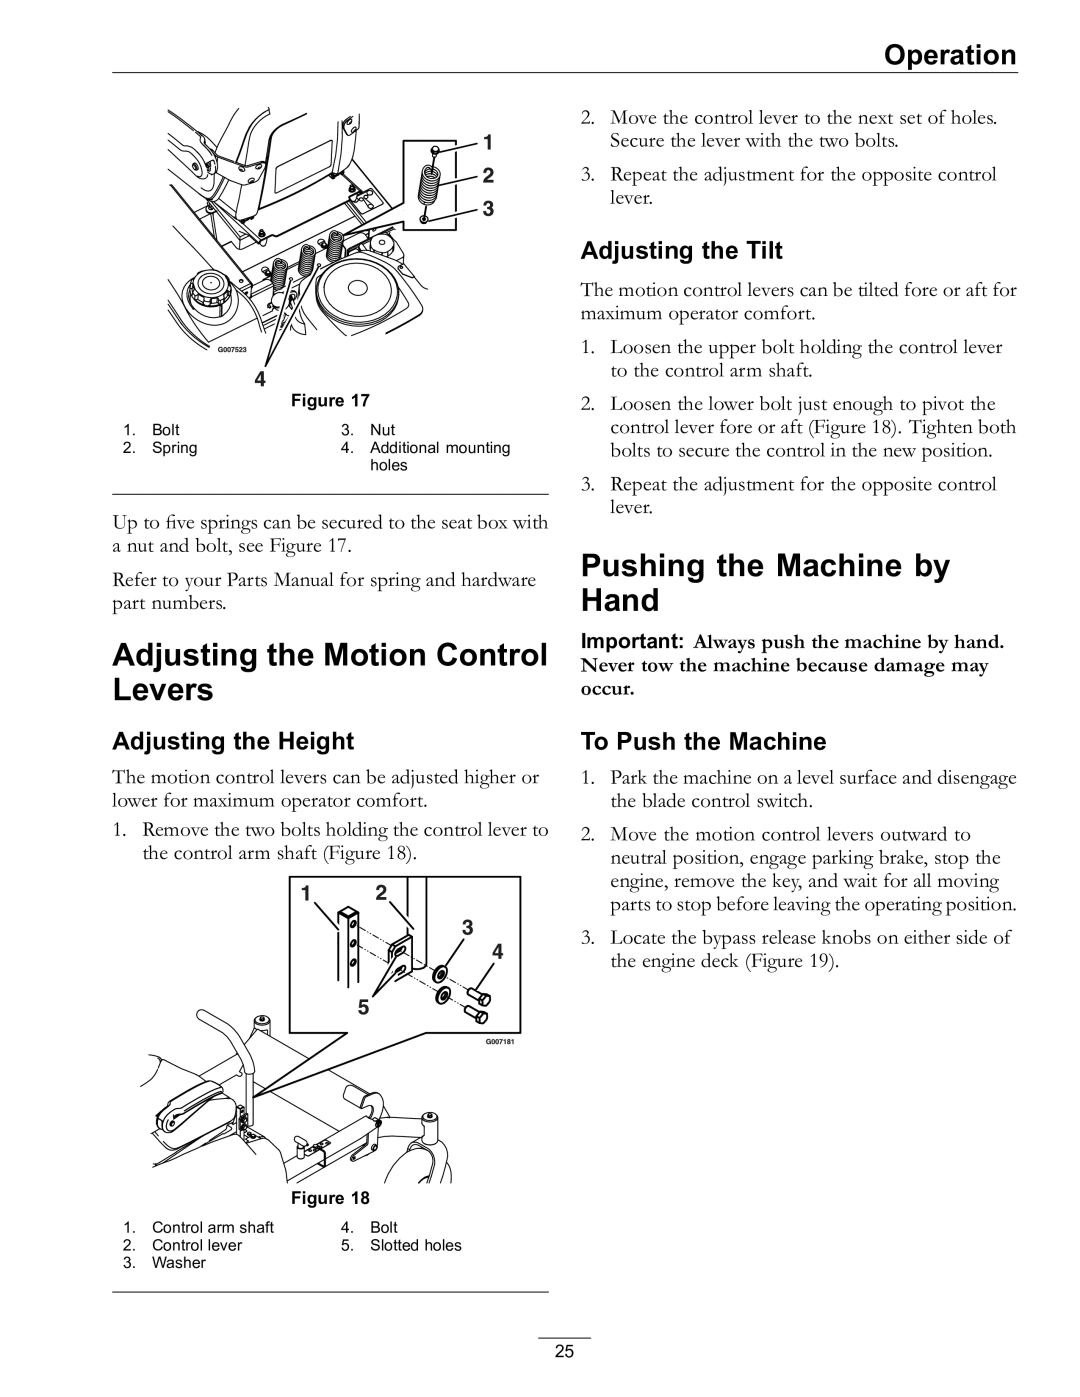 Exmark Lawn Mower manual Adjusting the Motion Control Levers, Pushing the Machine by Hand, Adjusting the Tilt 